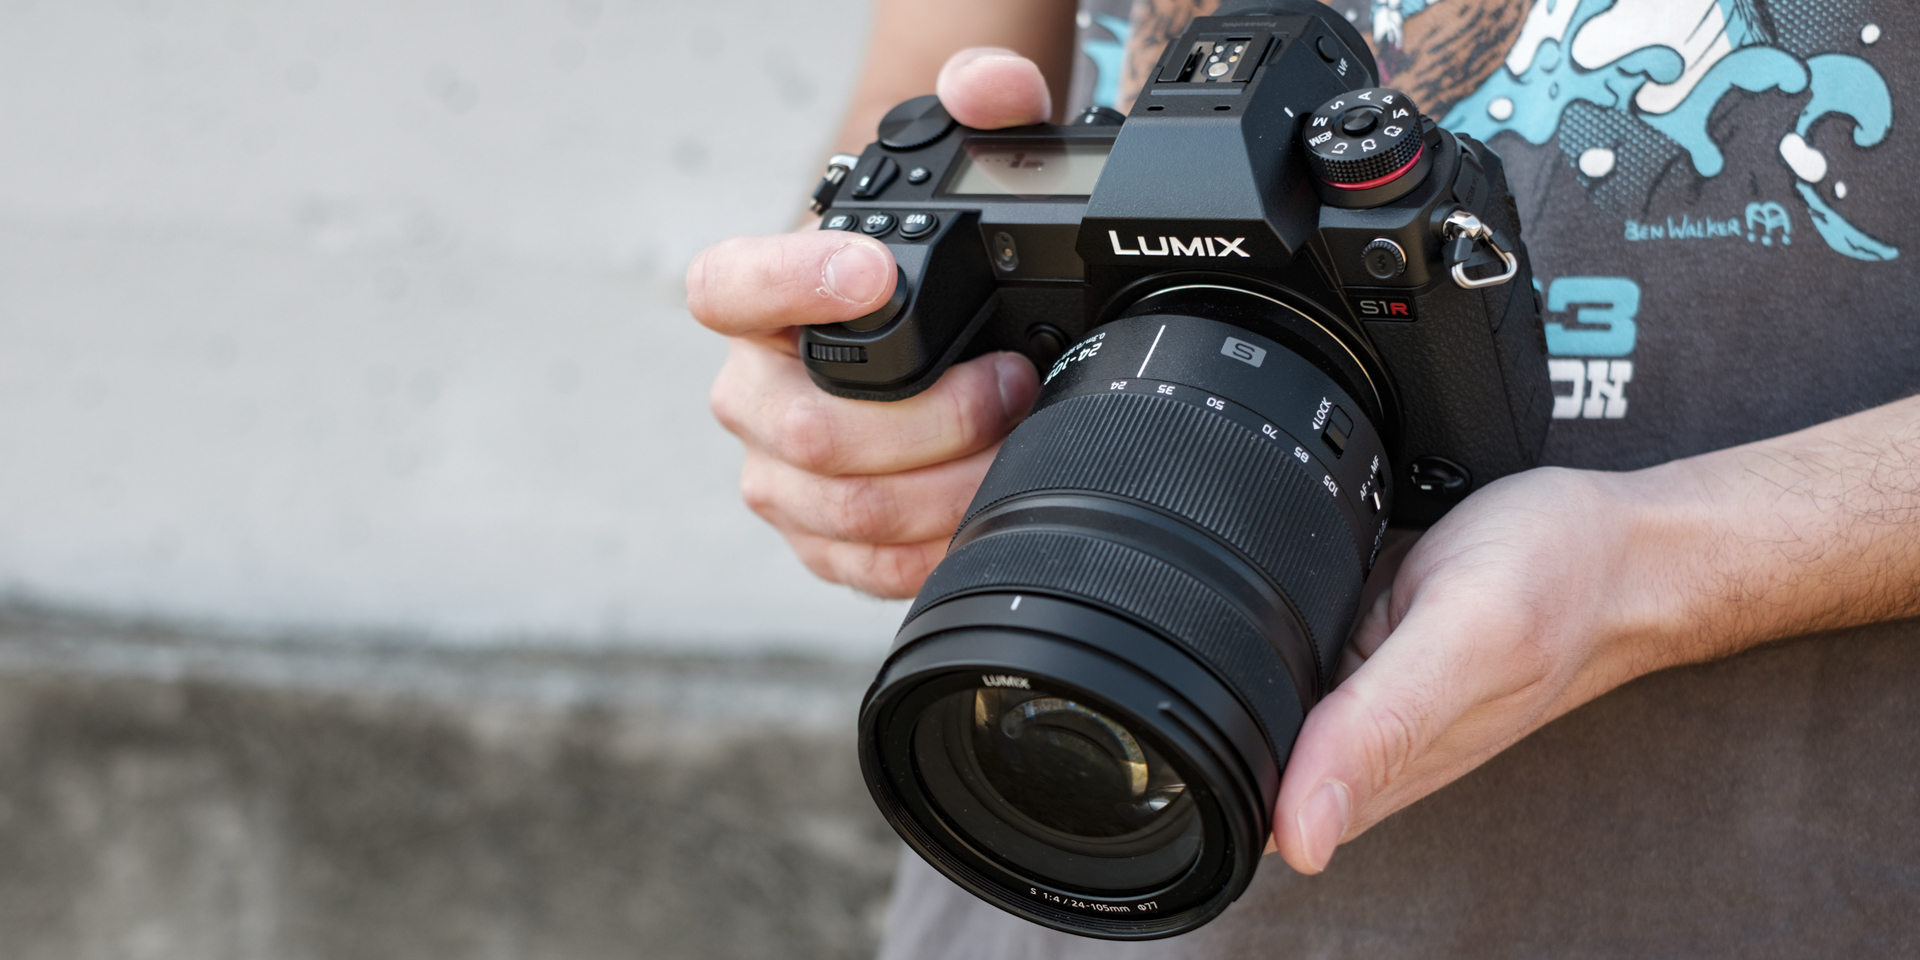 Panasonic S1R Review | What Do You Do With 187 | Digital Trends